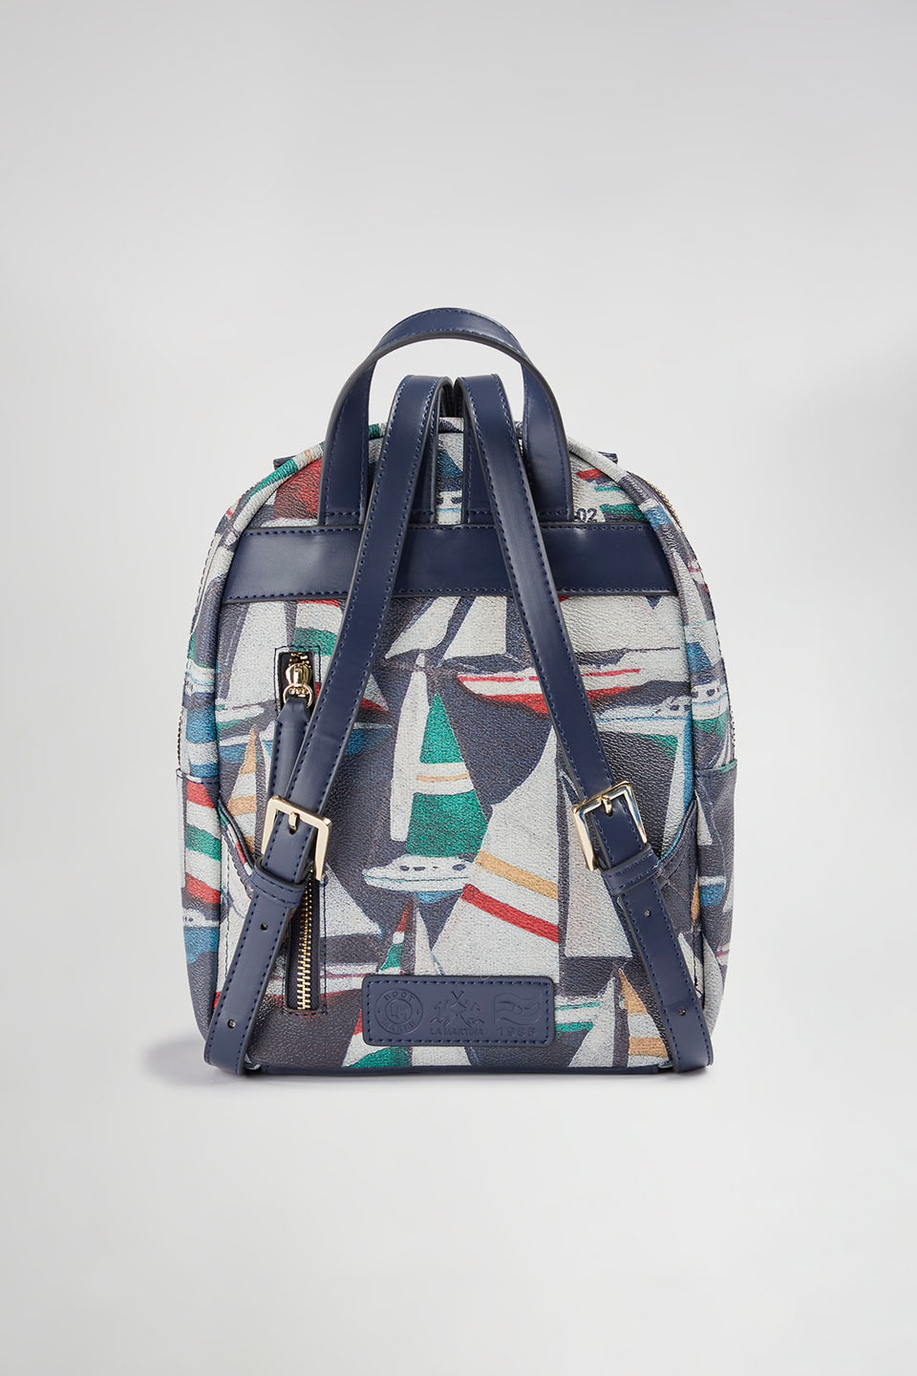 PU leather backpack - Accessories Woman | La Martina - Official Online Shop